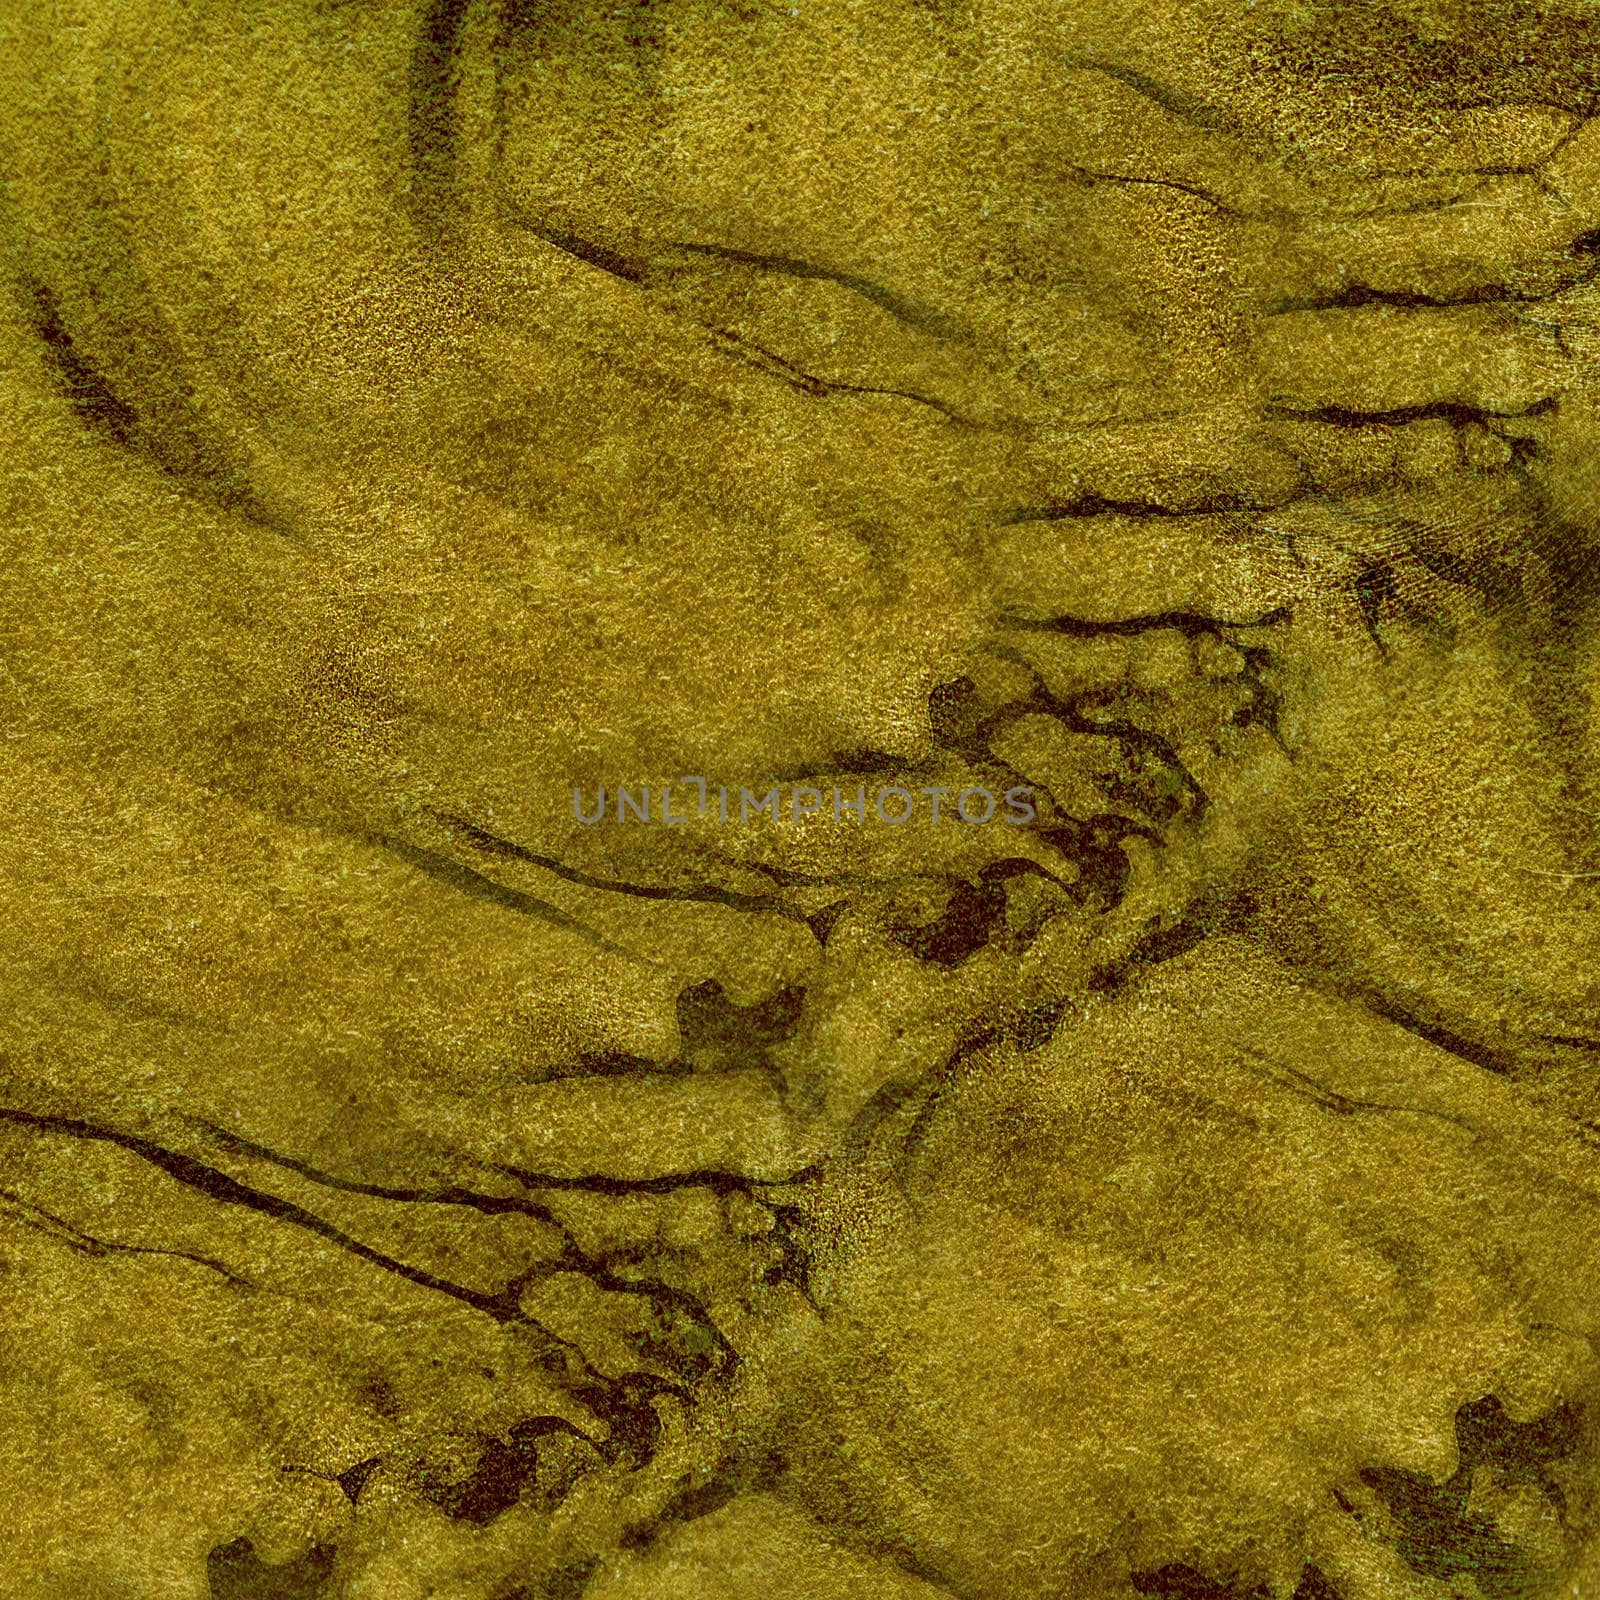 Abstract rough mustard-colored background with spots and irregularities on the surface